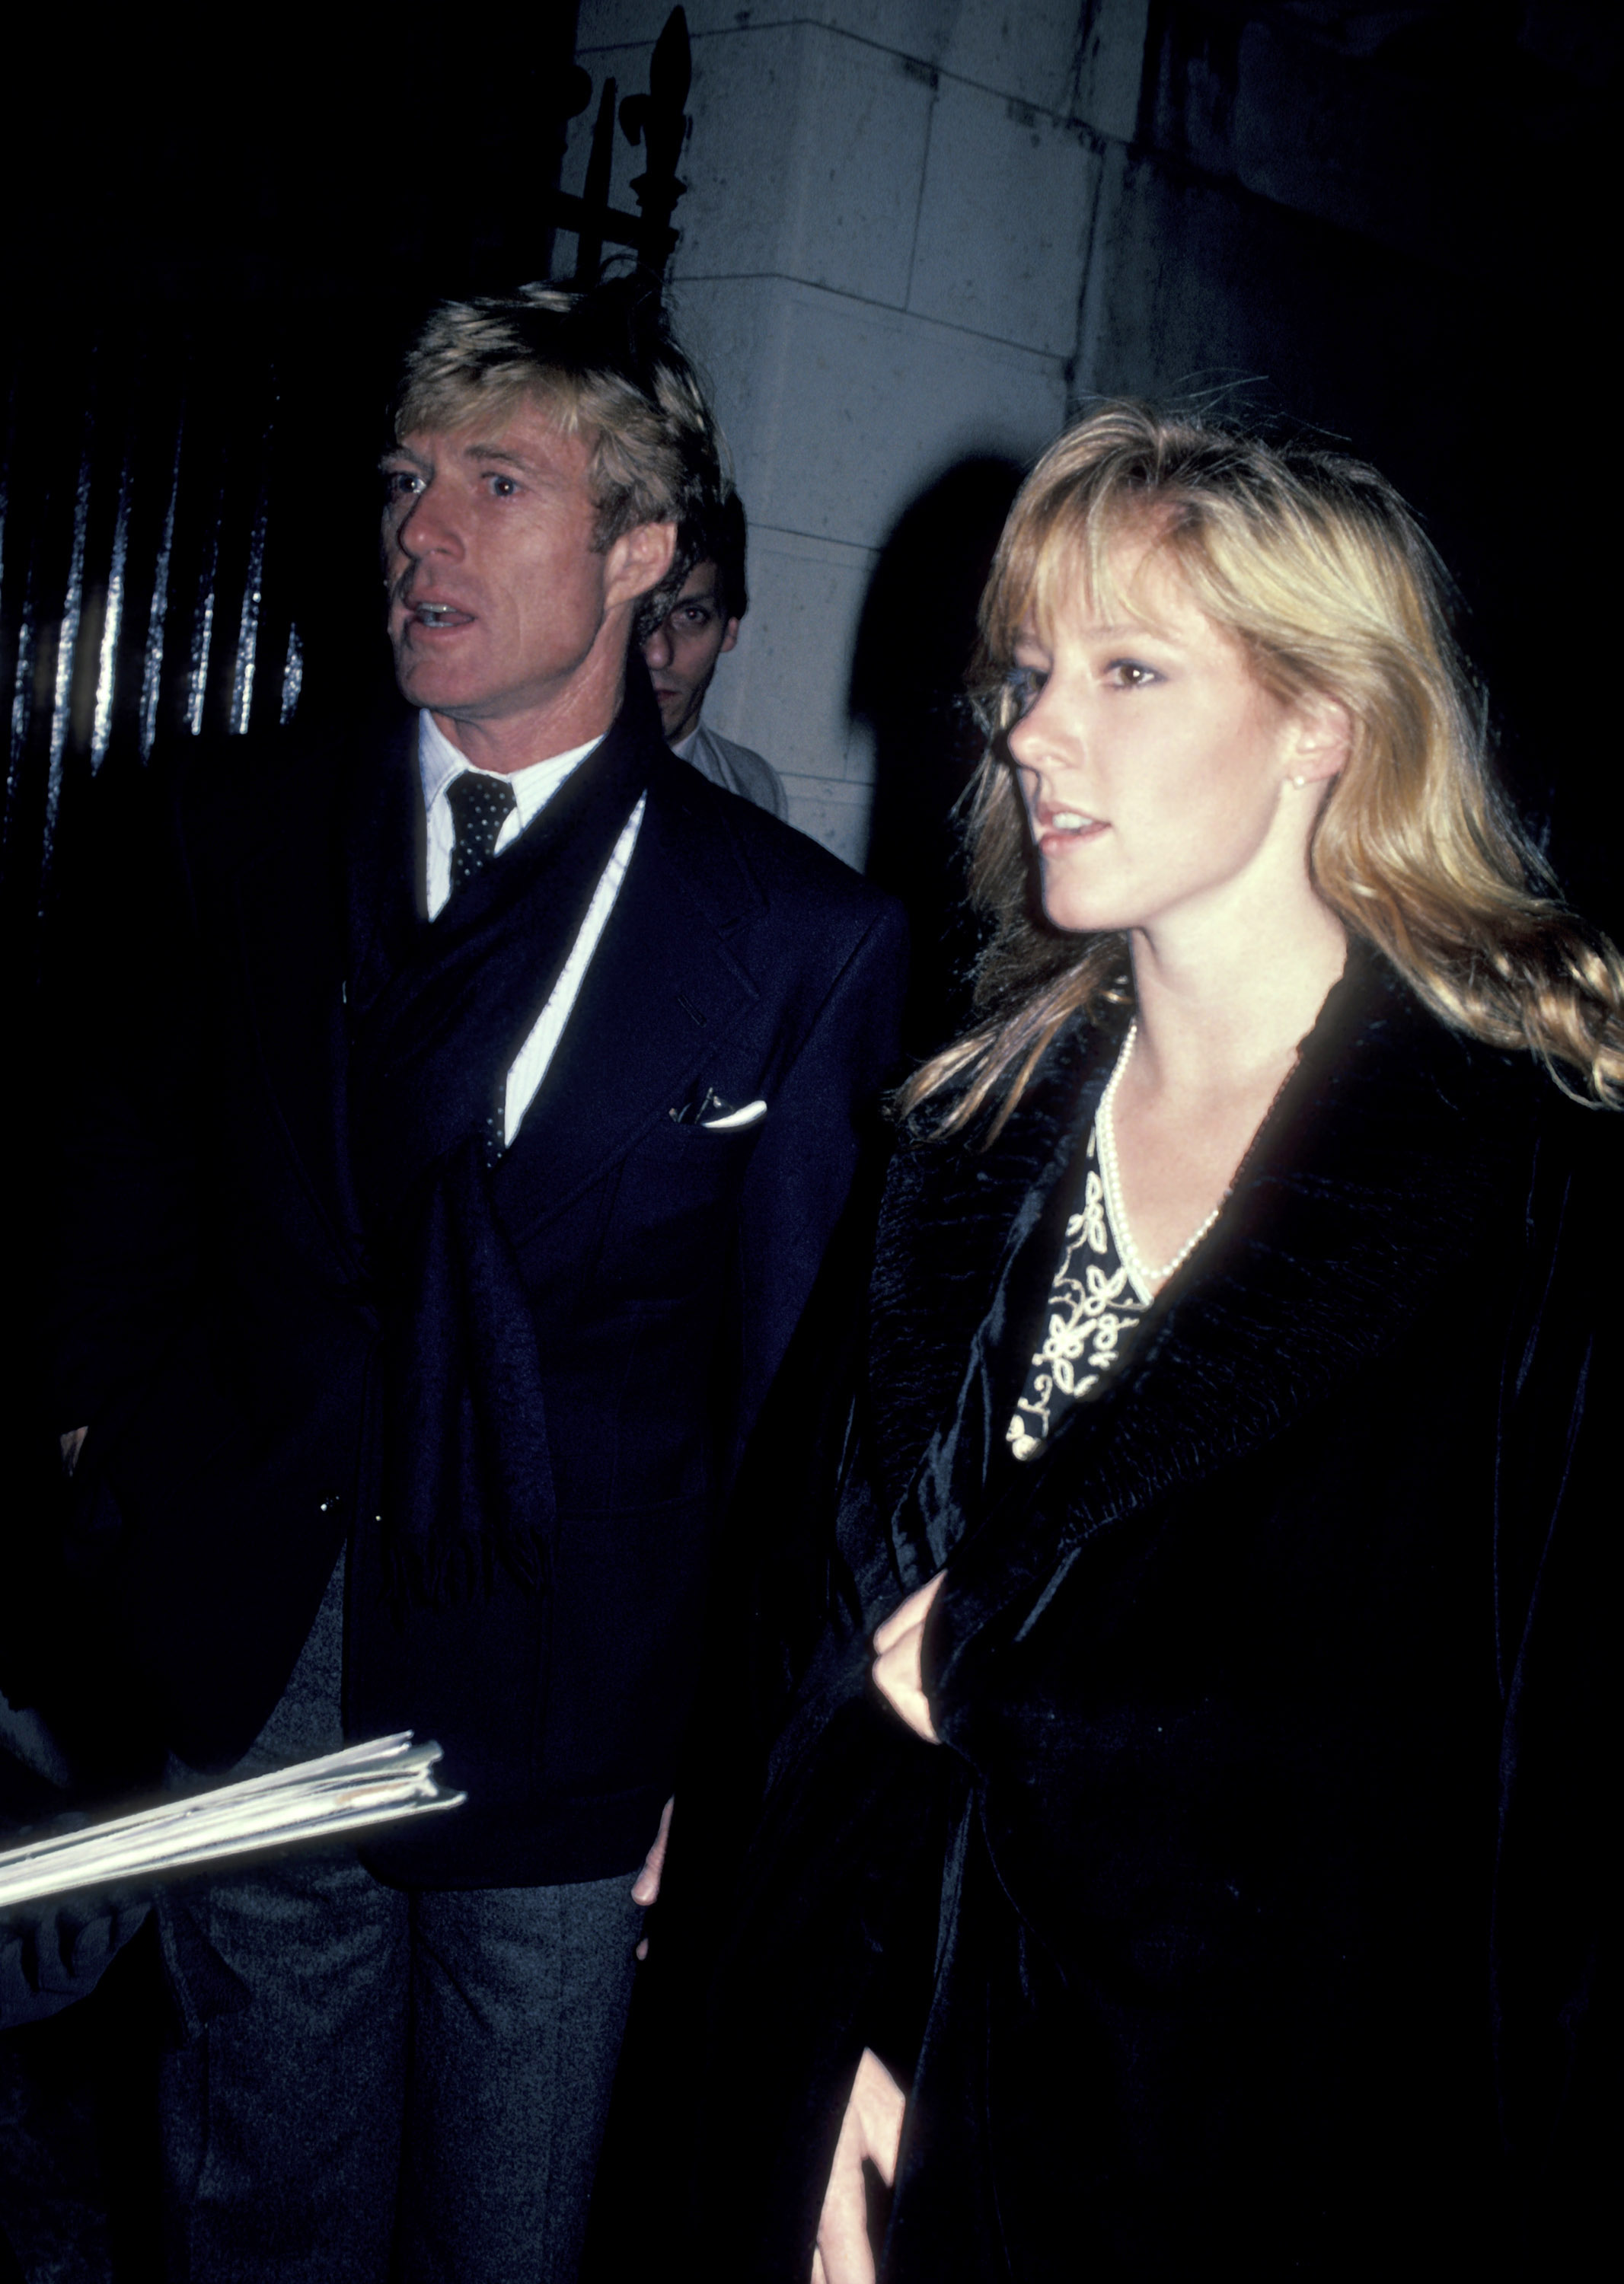 Robert Redford and Shauna Redford attend the opening of the "Highlight Exhibit at the International Center of Photography on November 17, 1983, in New York City. | Source: Getty Images